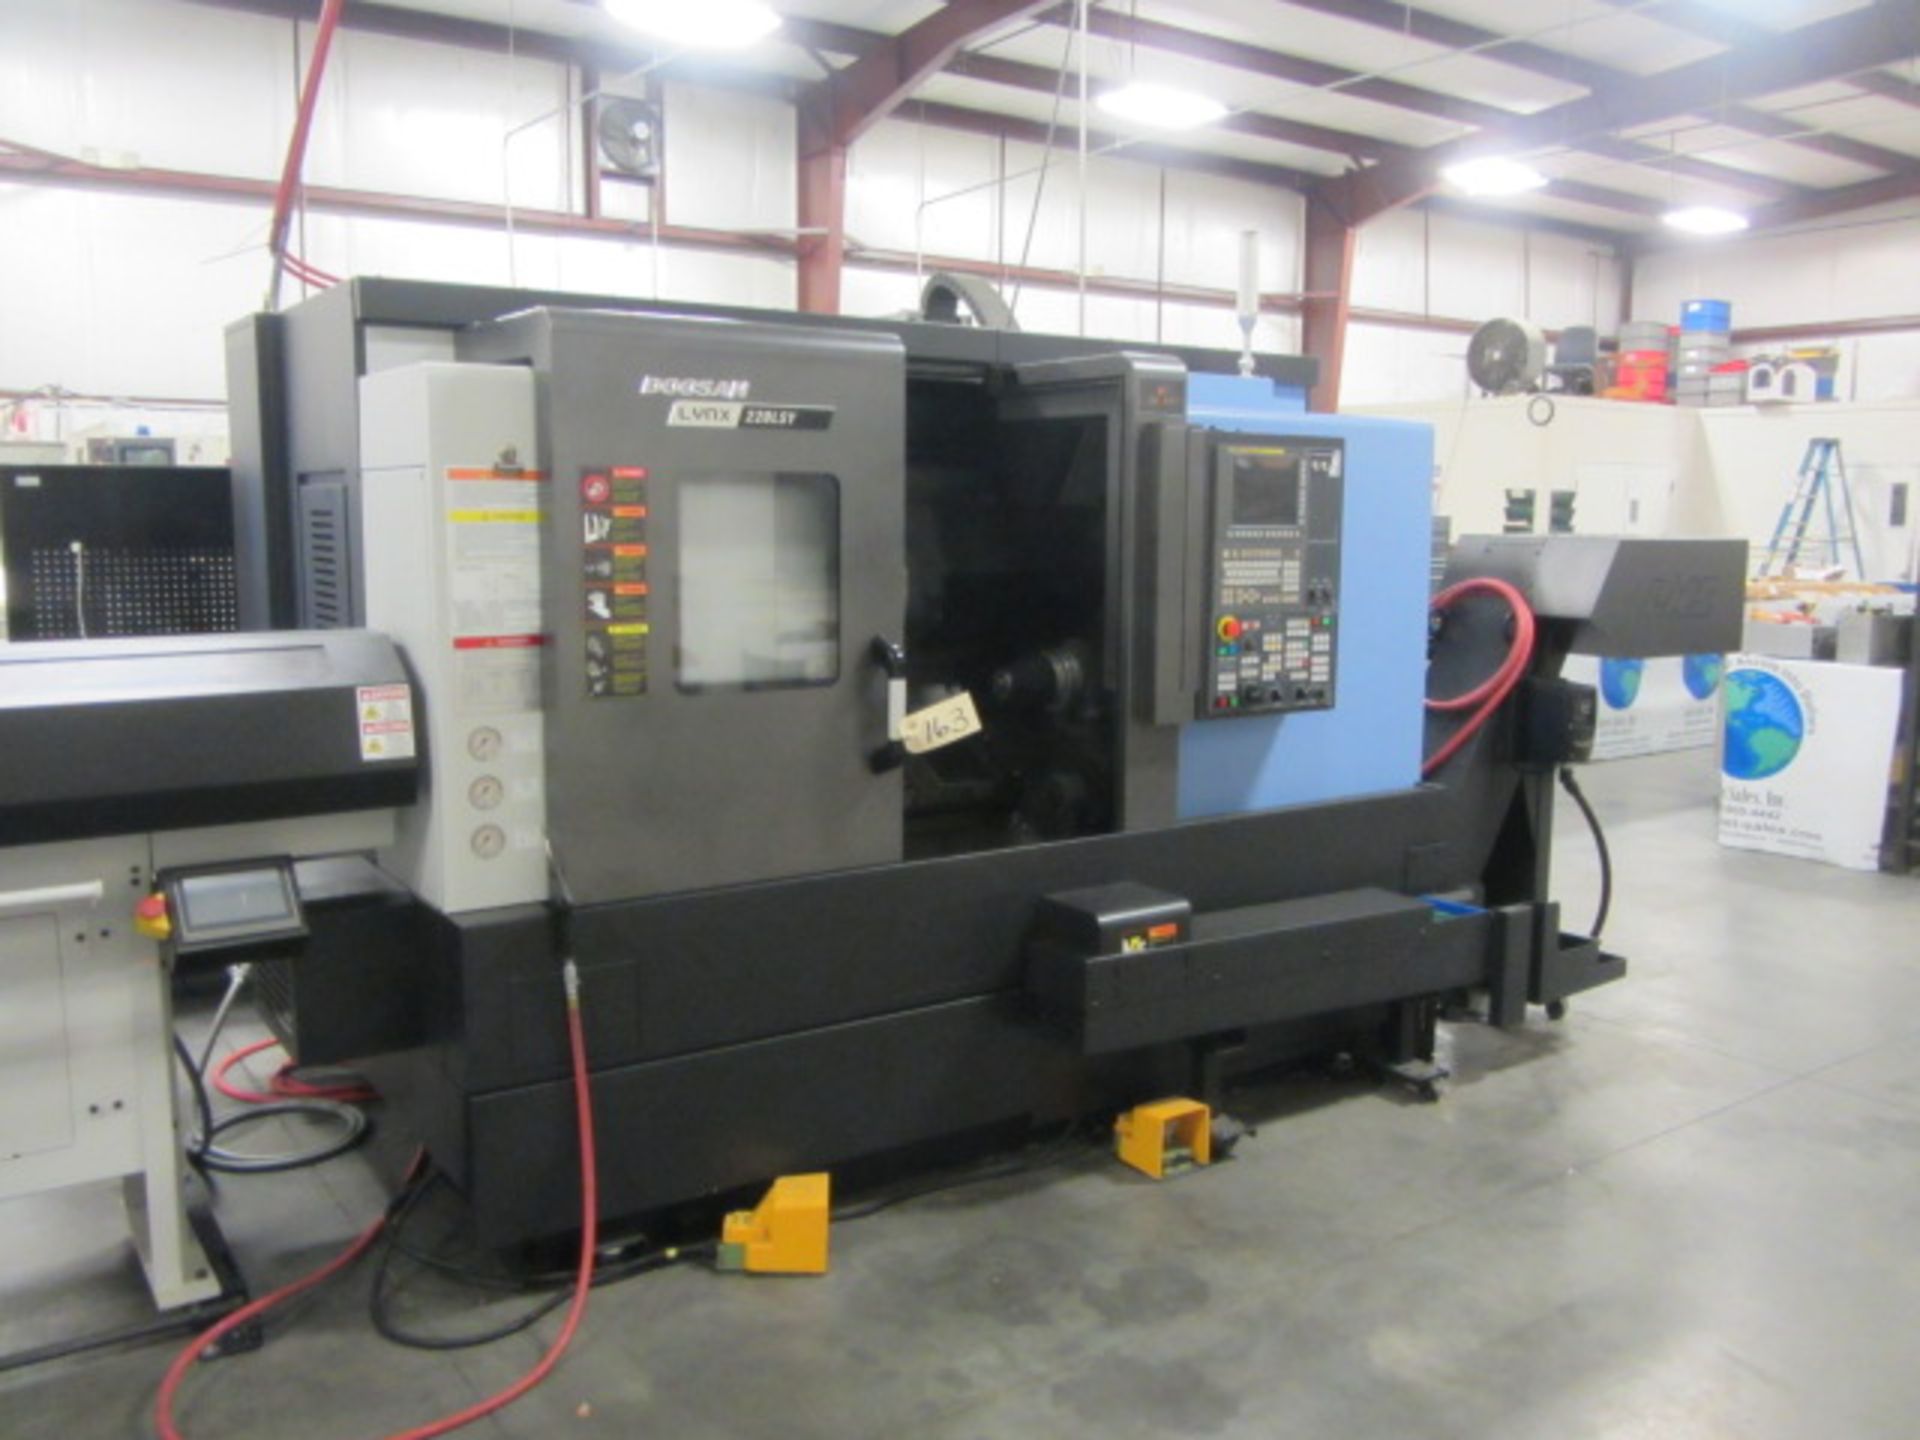 Doosan Lynx 220 LSYC CNC Turning Center with 8.25'' Chuck Main Spindle, 5.5'' Sub-Spindle, Y-